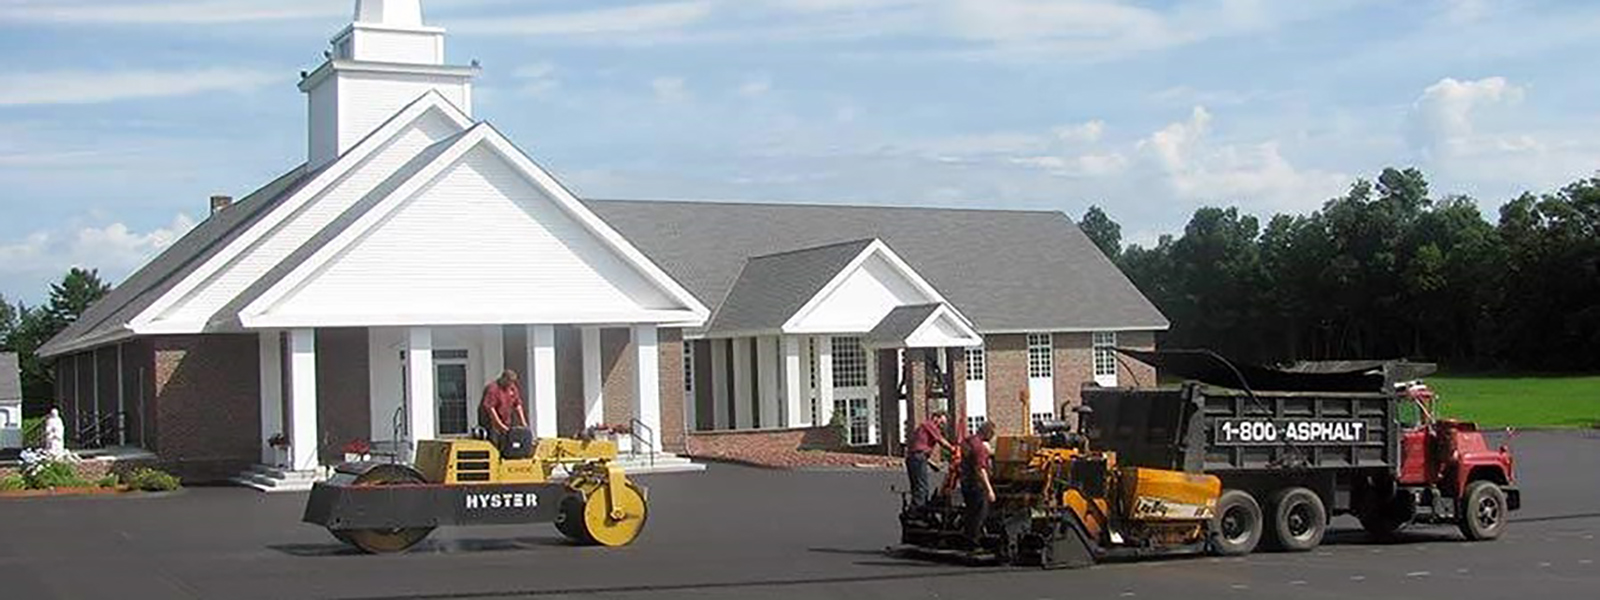 parking lot paving contractors in nh and mass